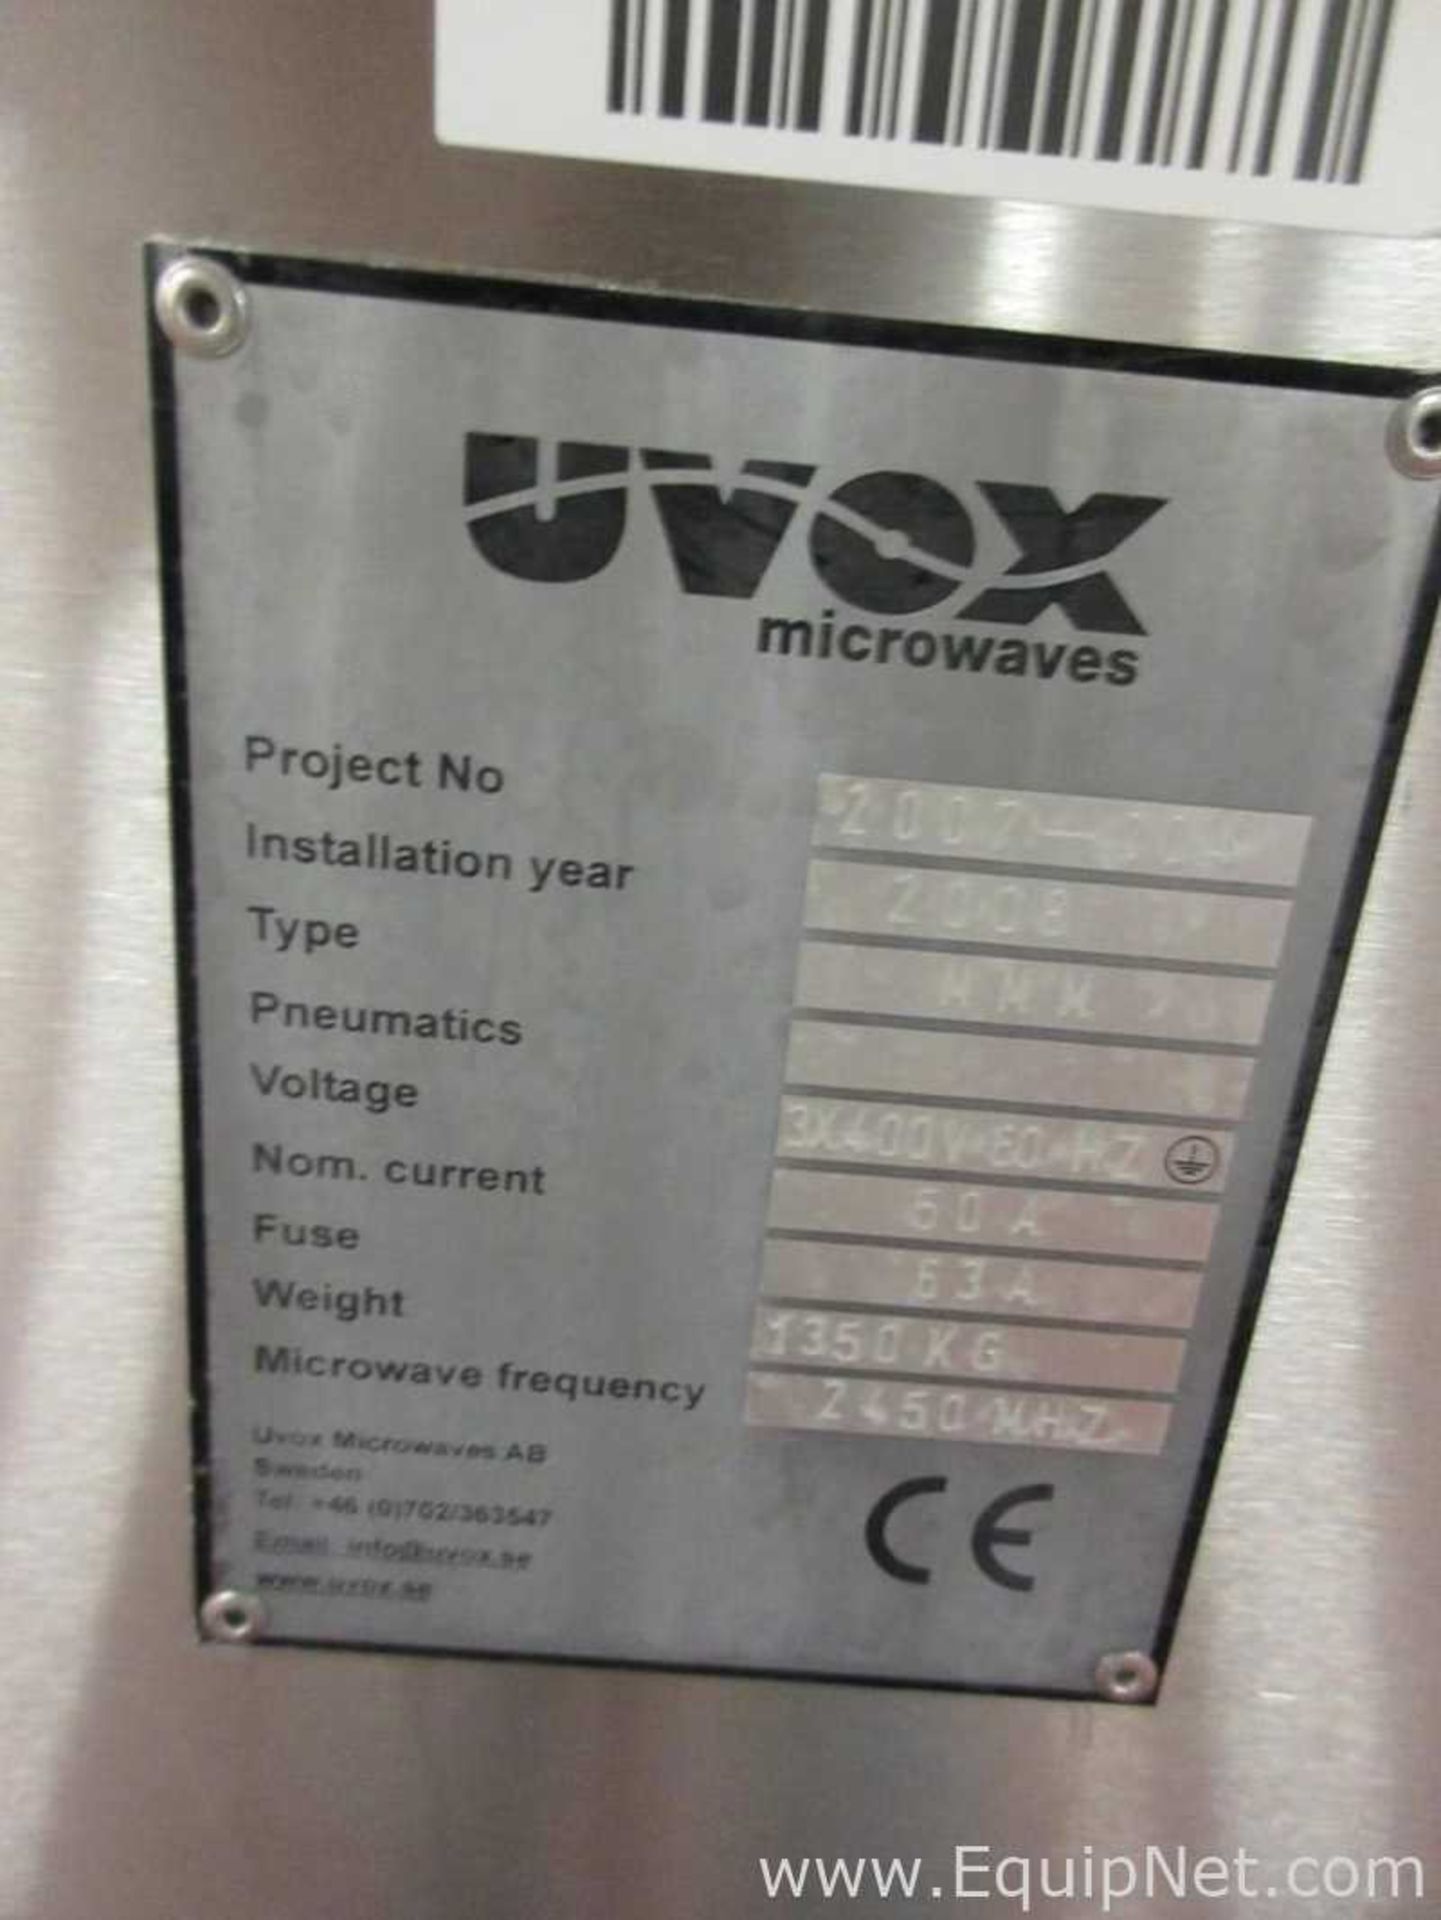 EQUIPNET LISTING #775984; REMOVAL COST: $6,510.00; MODEL: MMM; DESCRIPTION: Tivox Uvox Microwave - Image 7 of 18